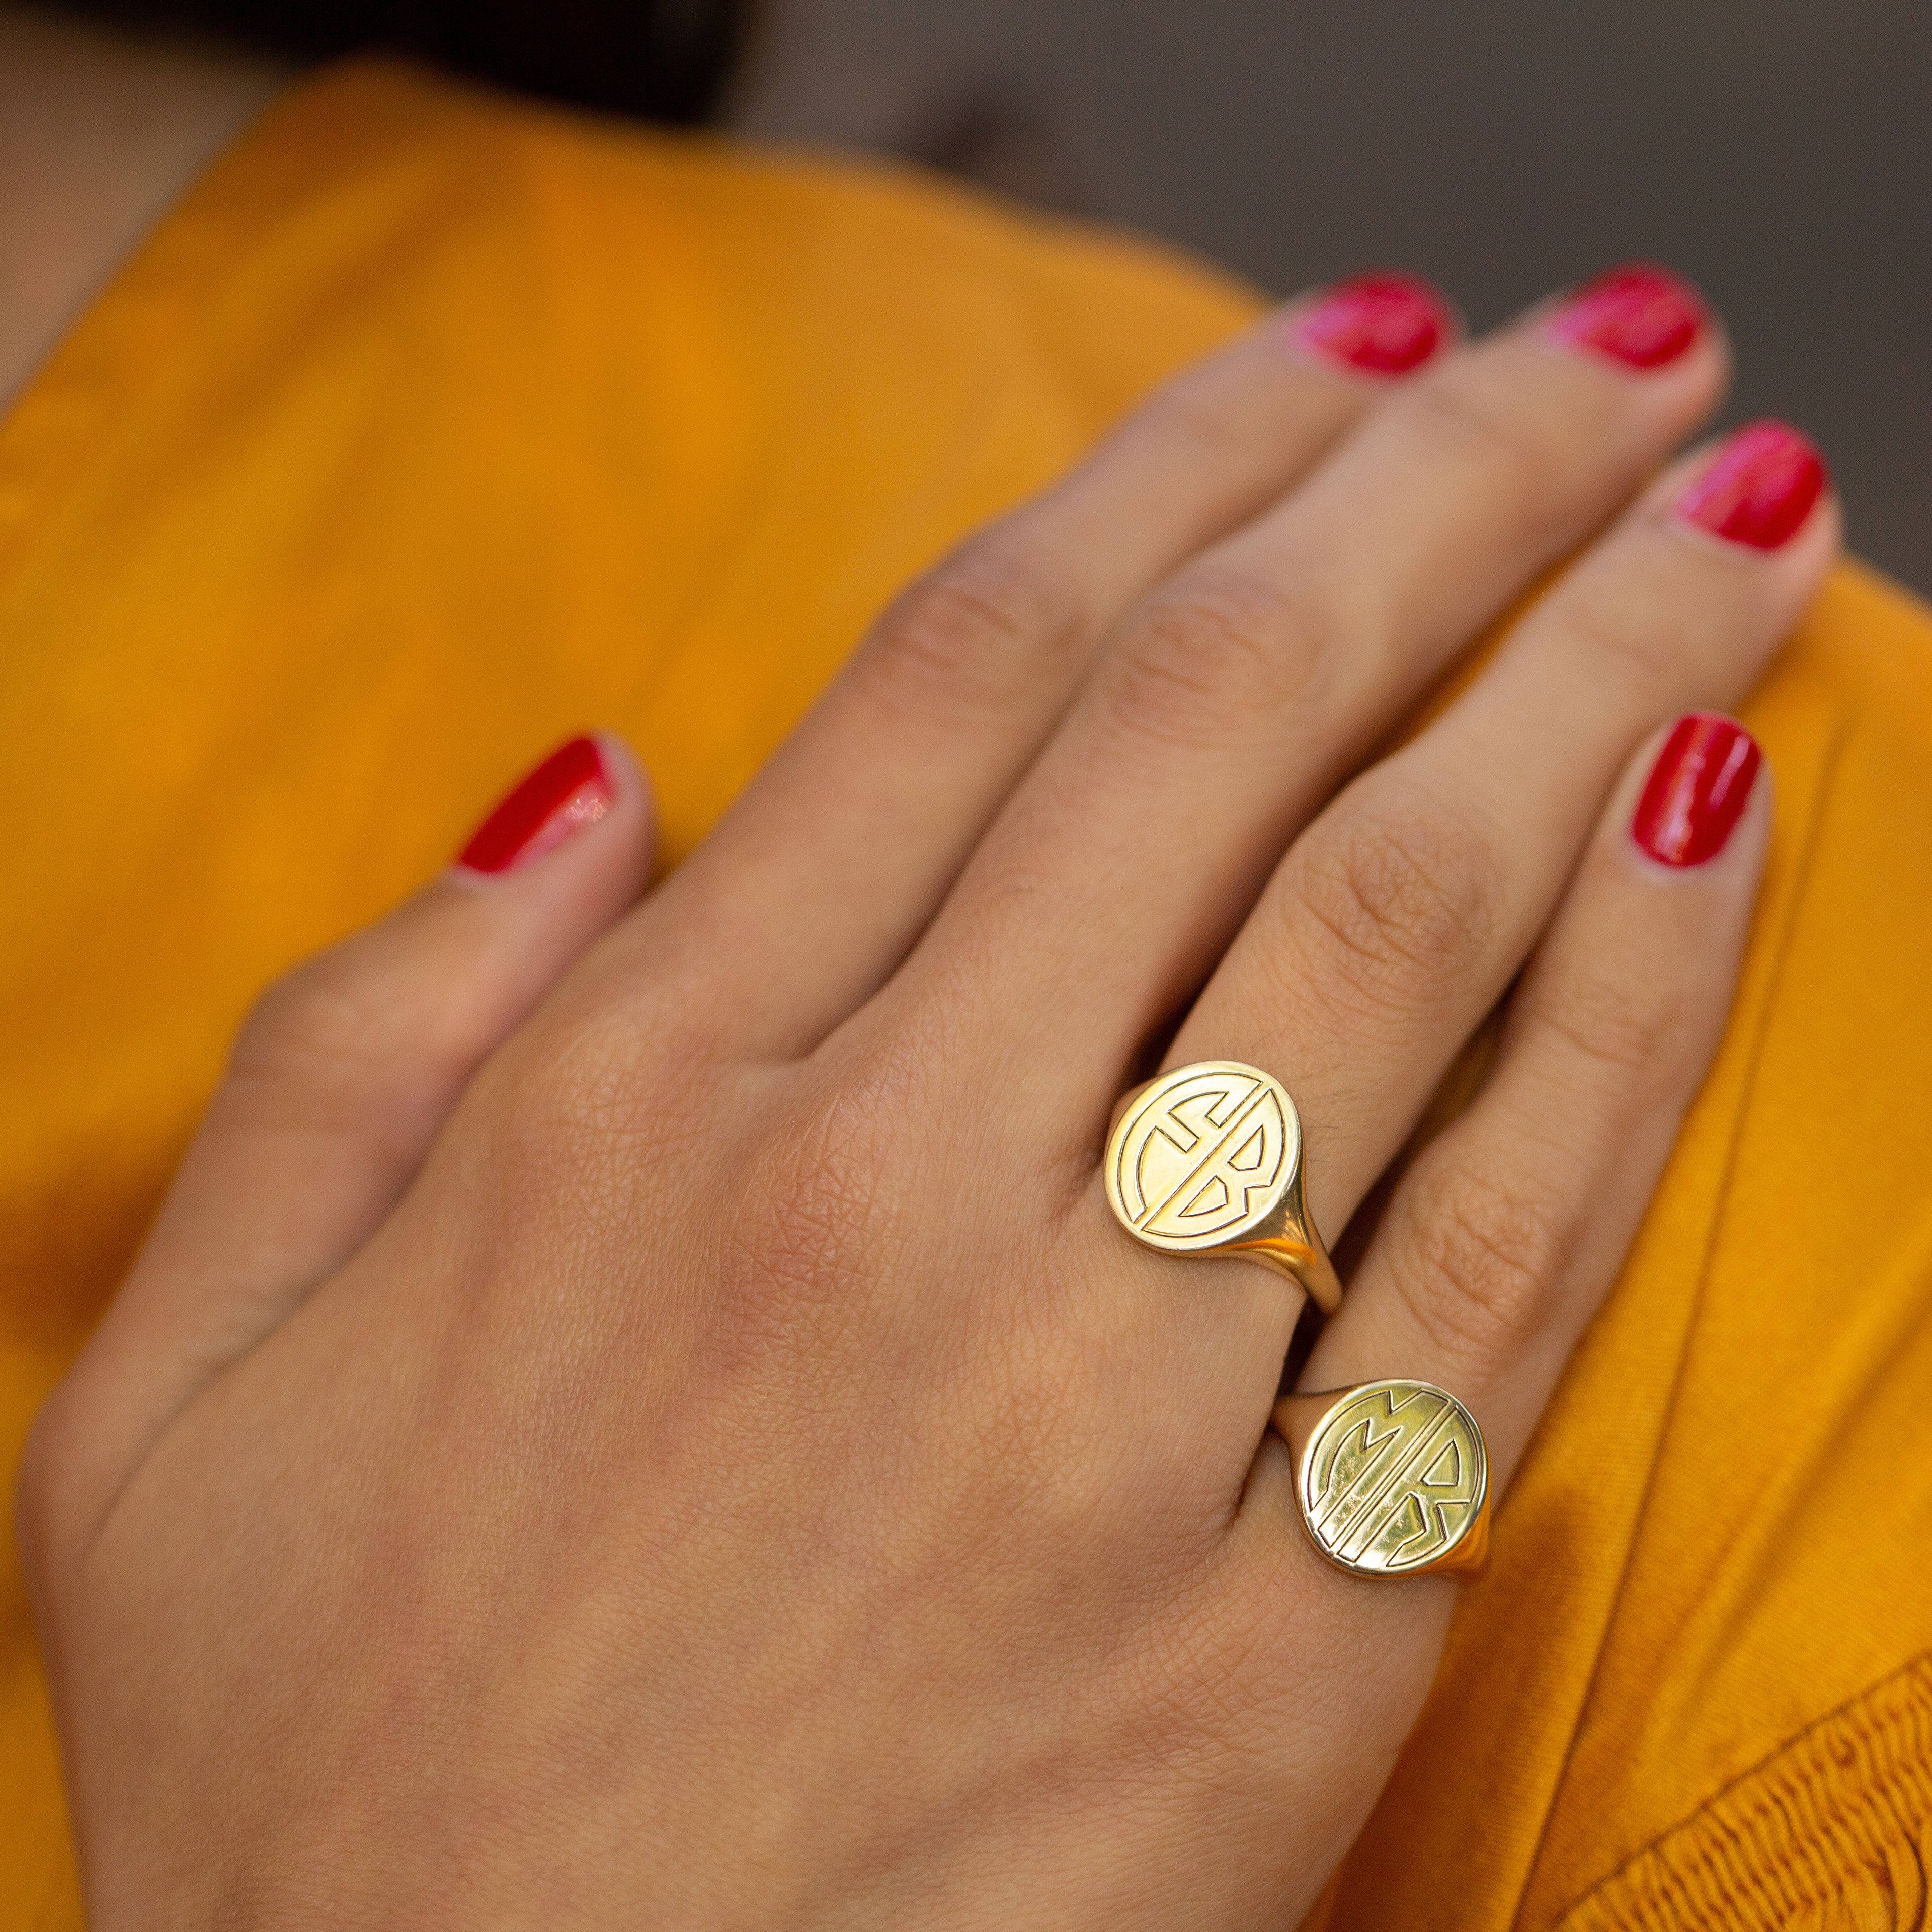 The F&B Large Gold Signet Ring